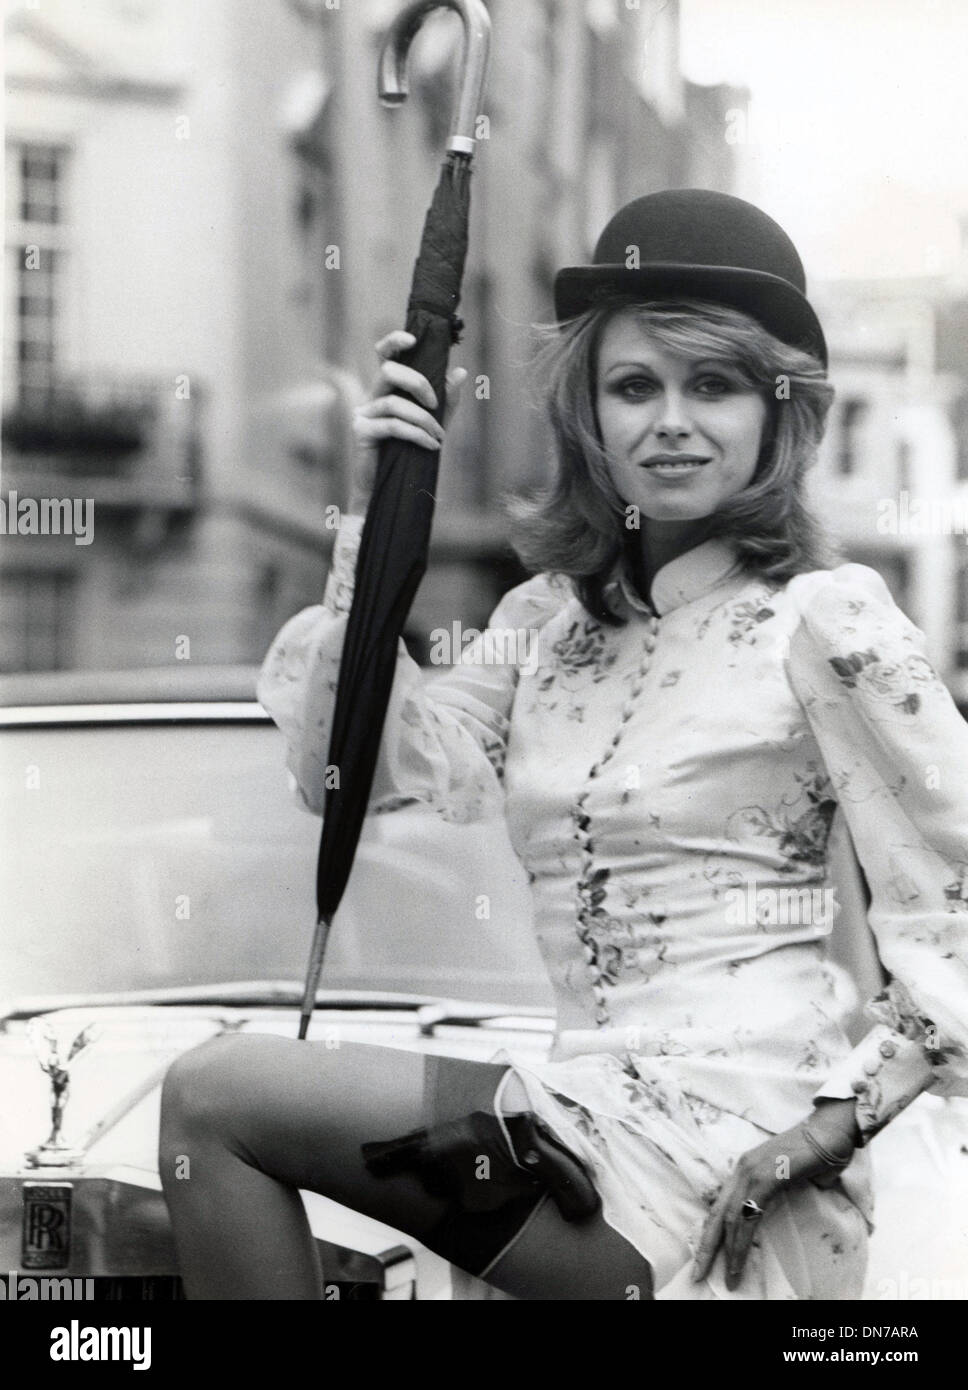 Mar. 8, 1975 - London, England, U.K. - Actress JOANNA LUMLEY the new super-girl in the 'Avengers' television series sports the John Steed bowler hat and umbrella in London. Stock Photo